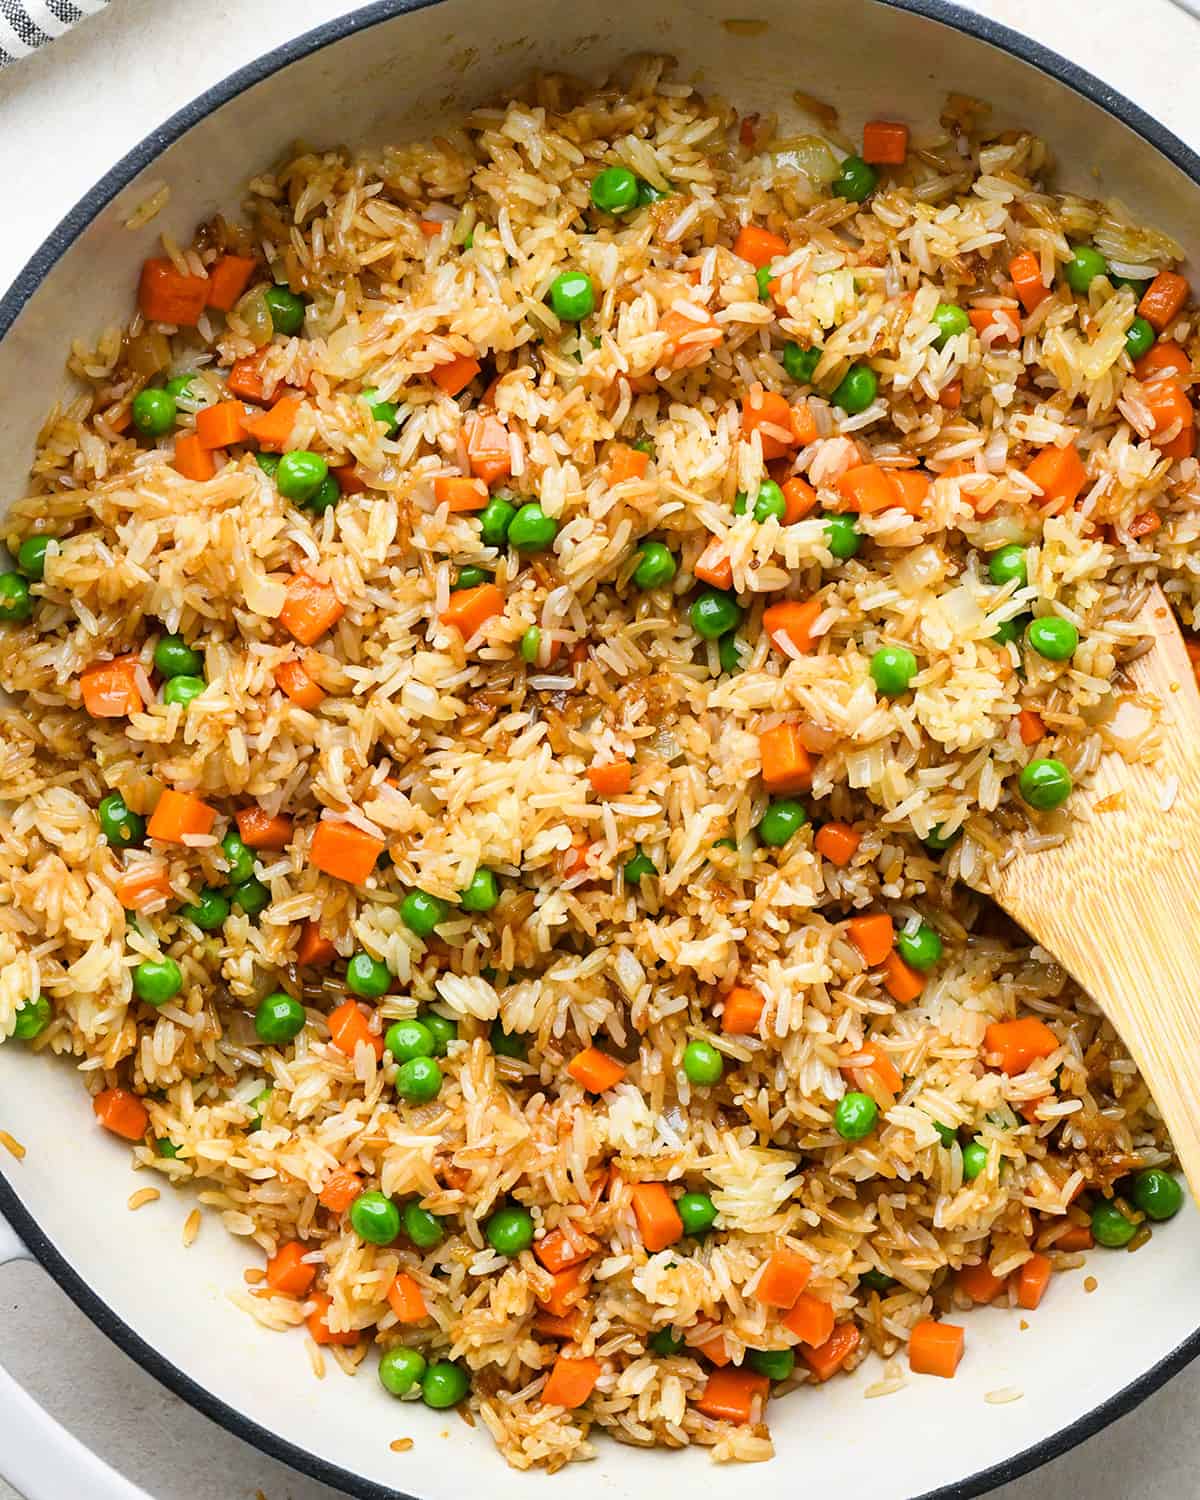 How to Make Fried Rice - adding peas, soy sauce and seasonings after mixing